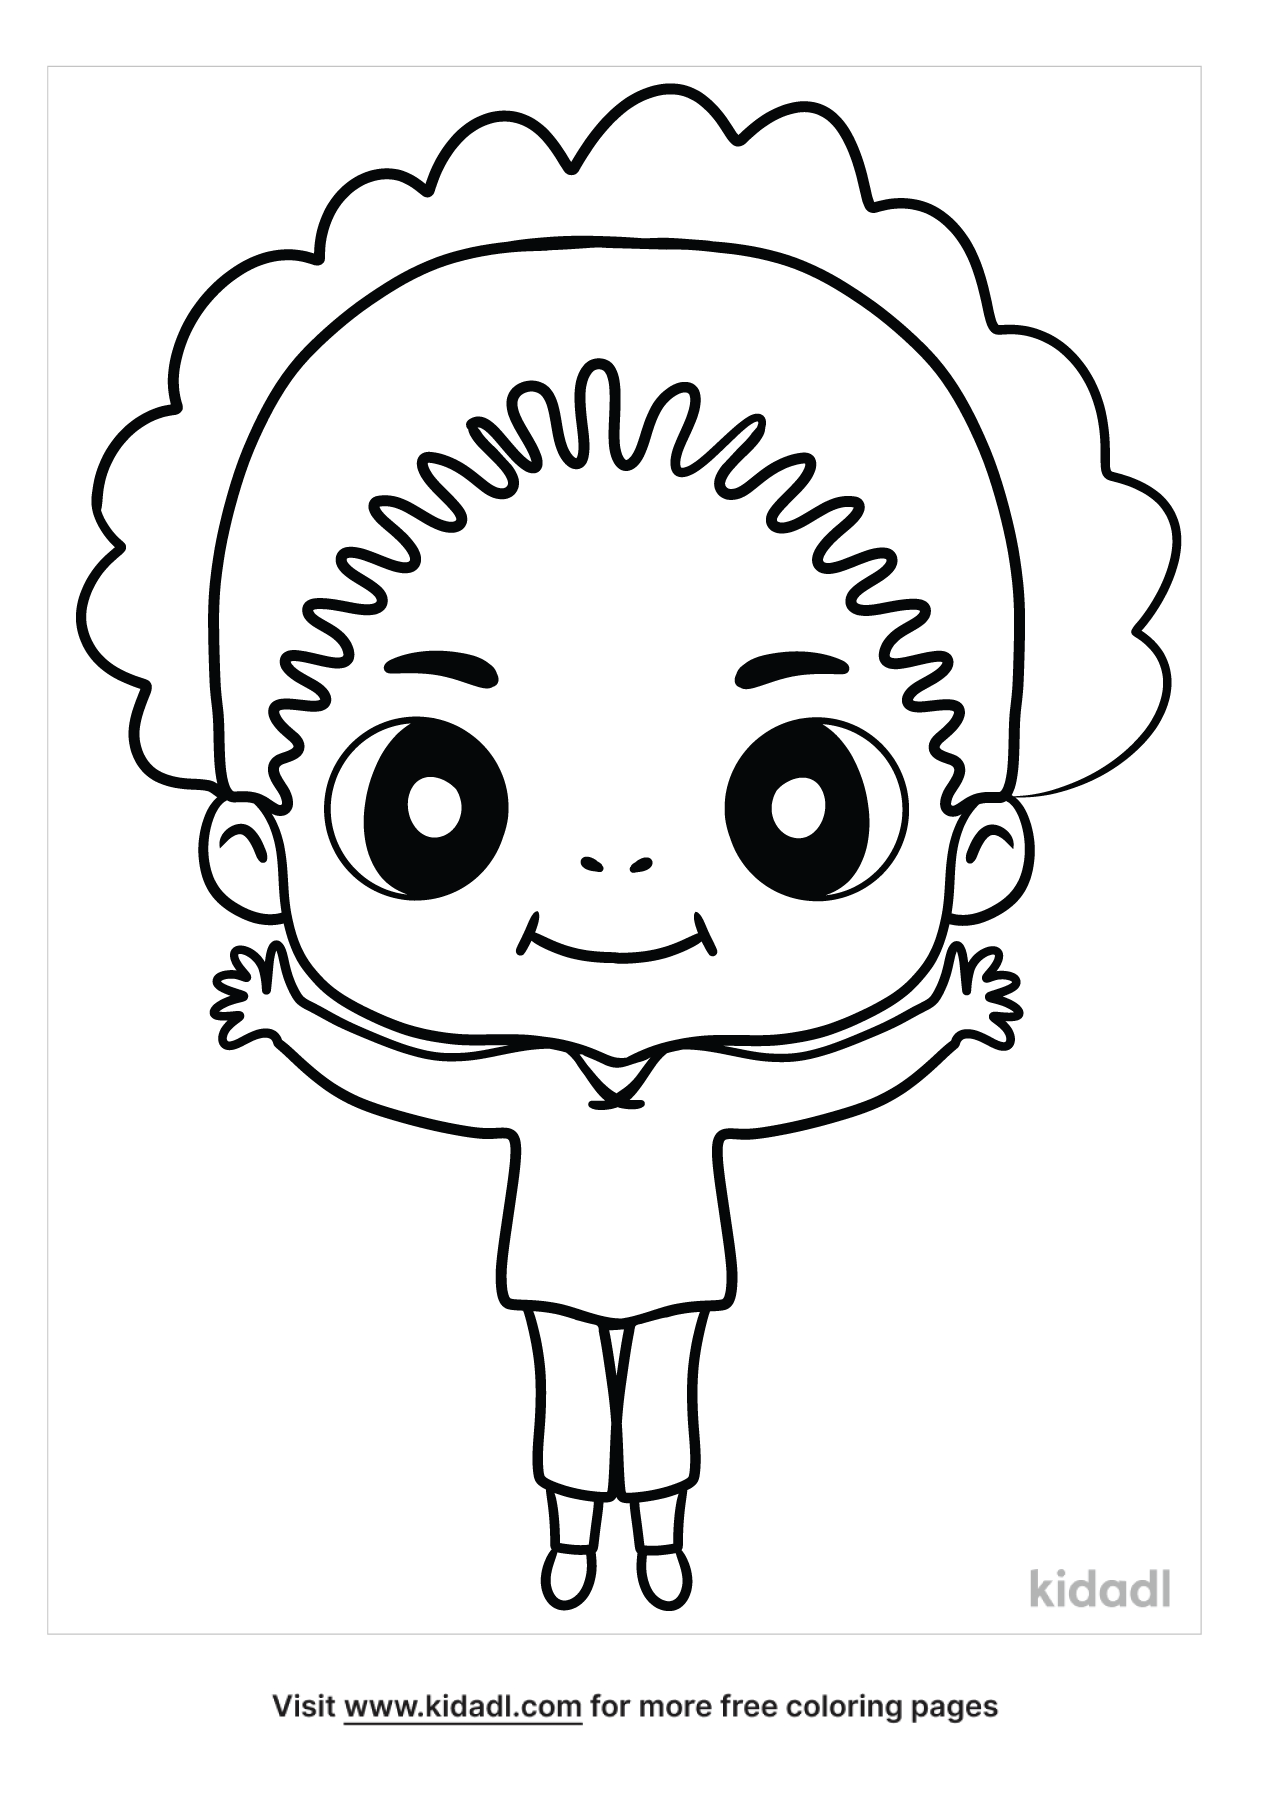 African American Baby Girl Coloring Pages | Free People Coloring Pages |  Kidadl